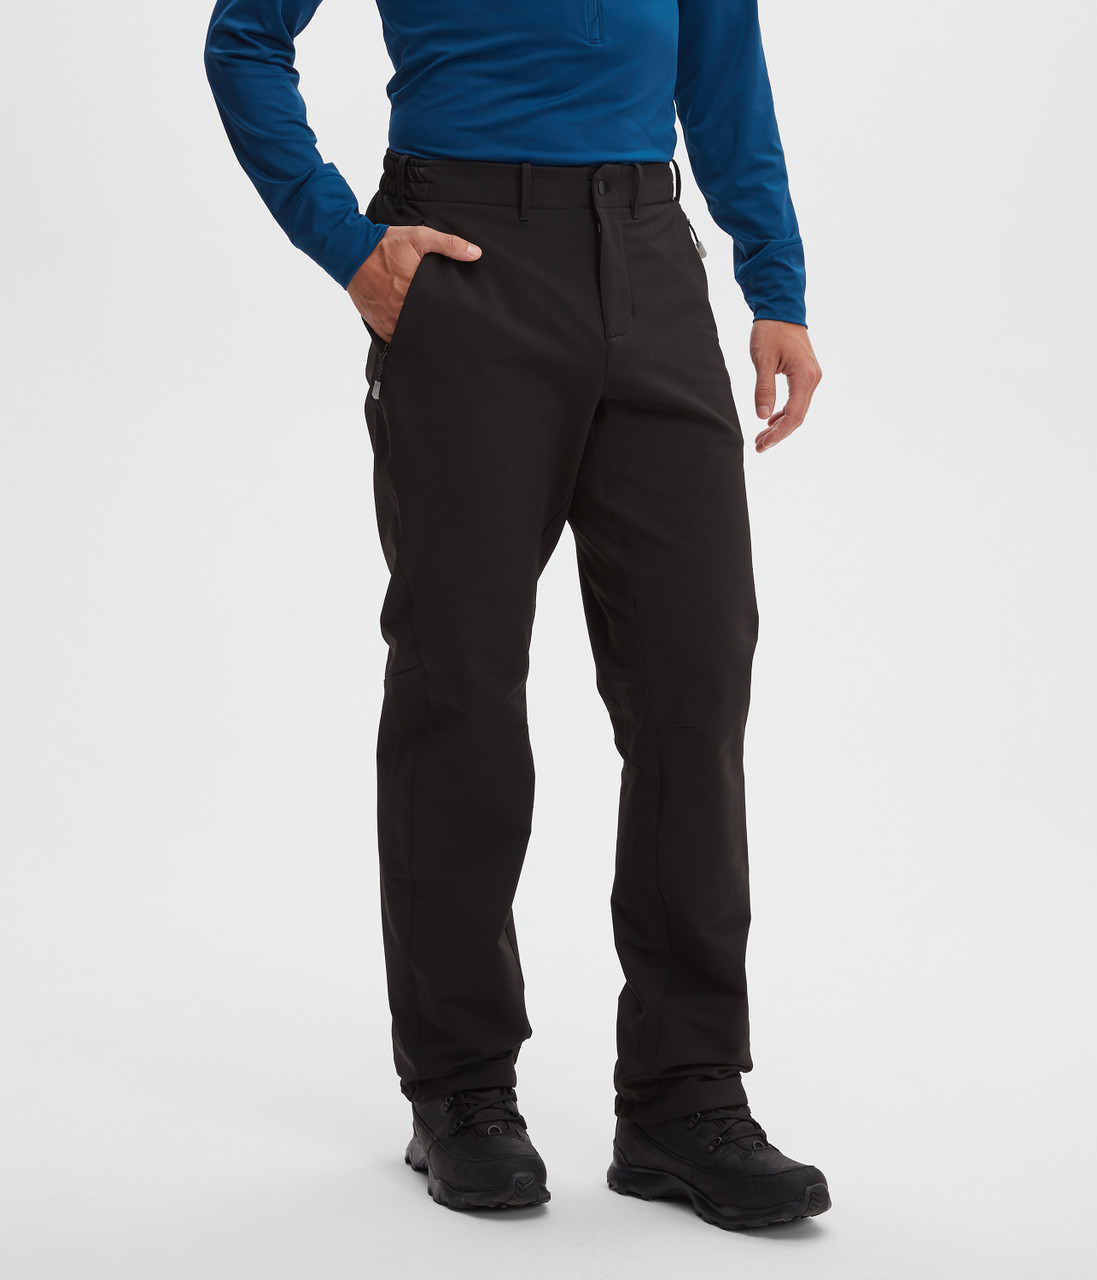 Men's Outdoor Pants - All in Motion Black L 1 ct